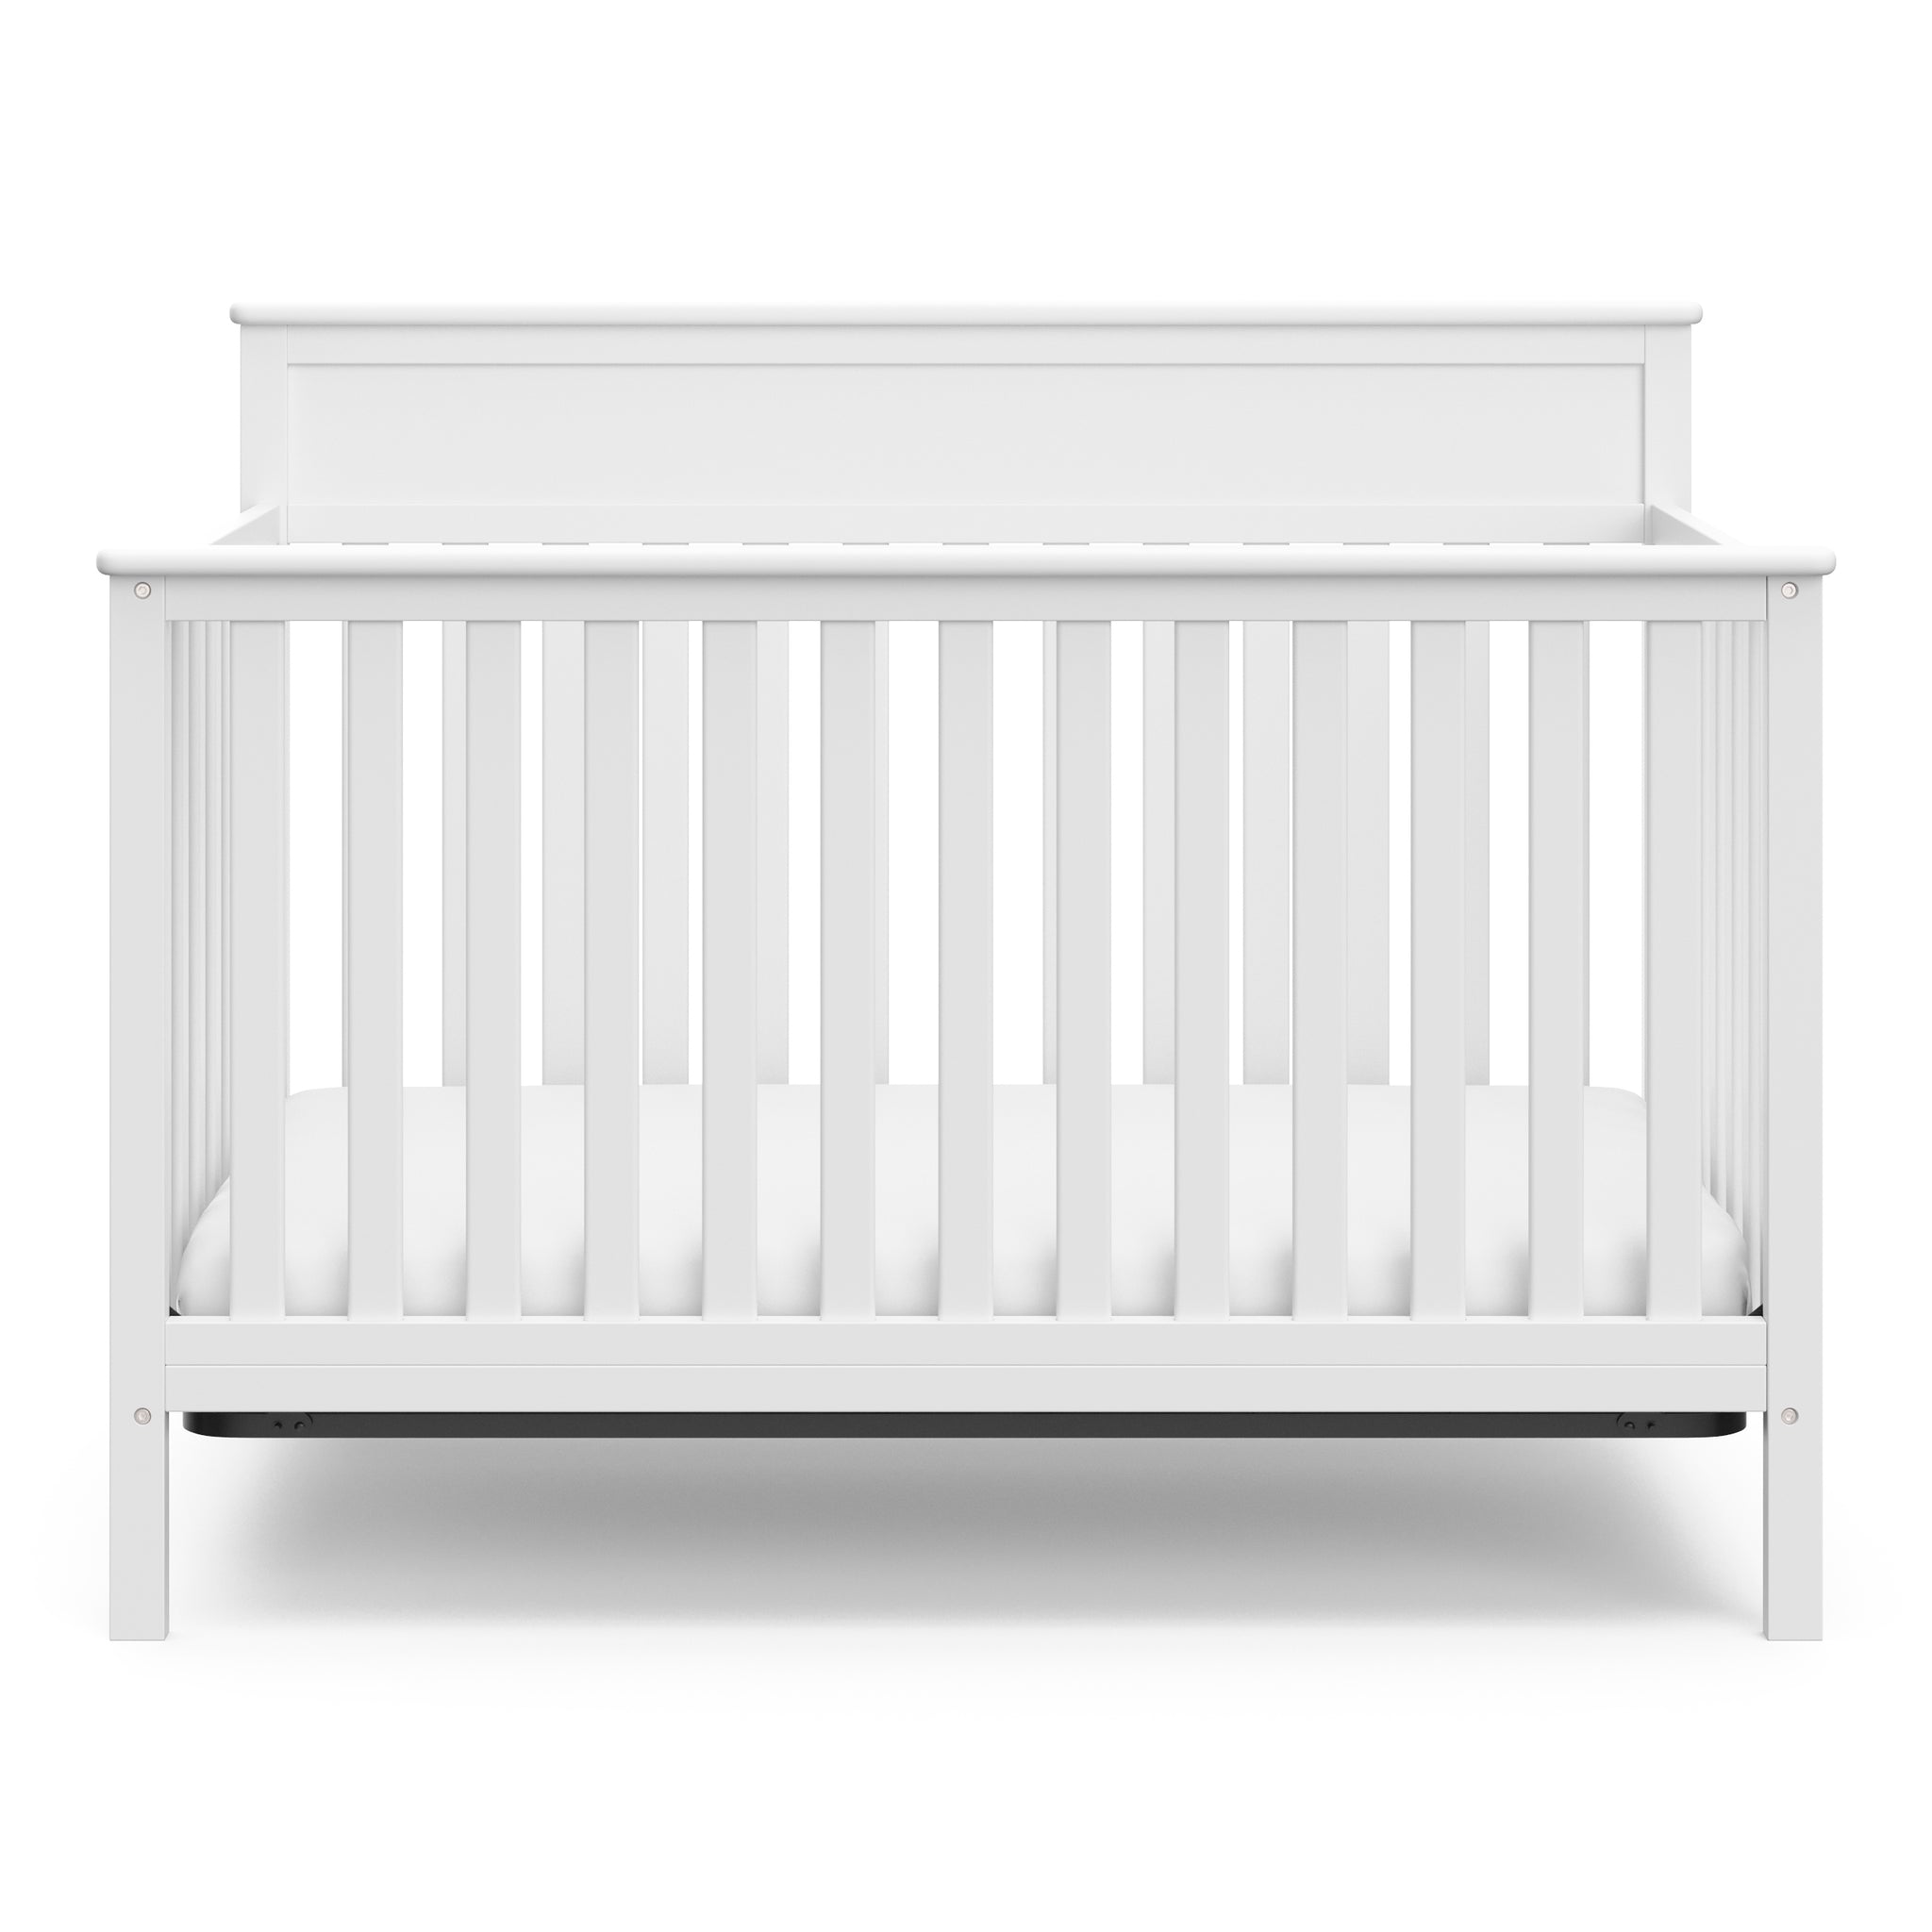 front view of white crib